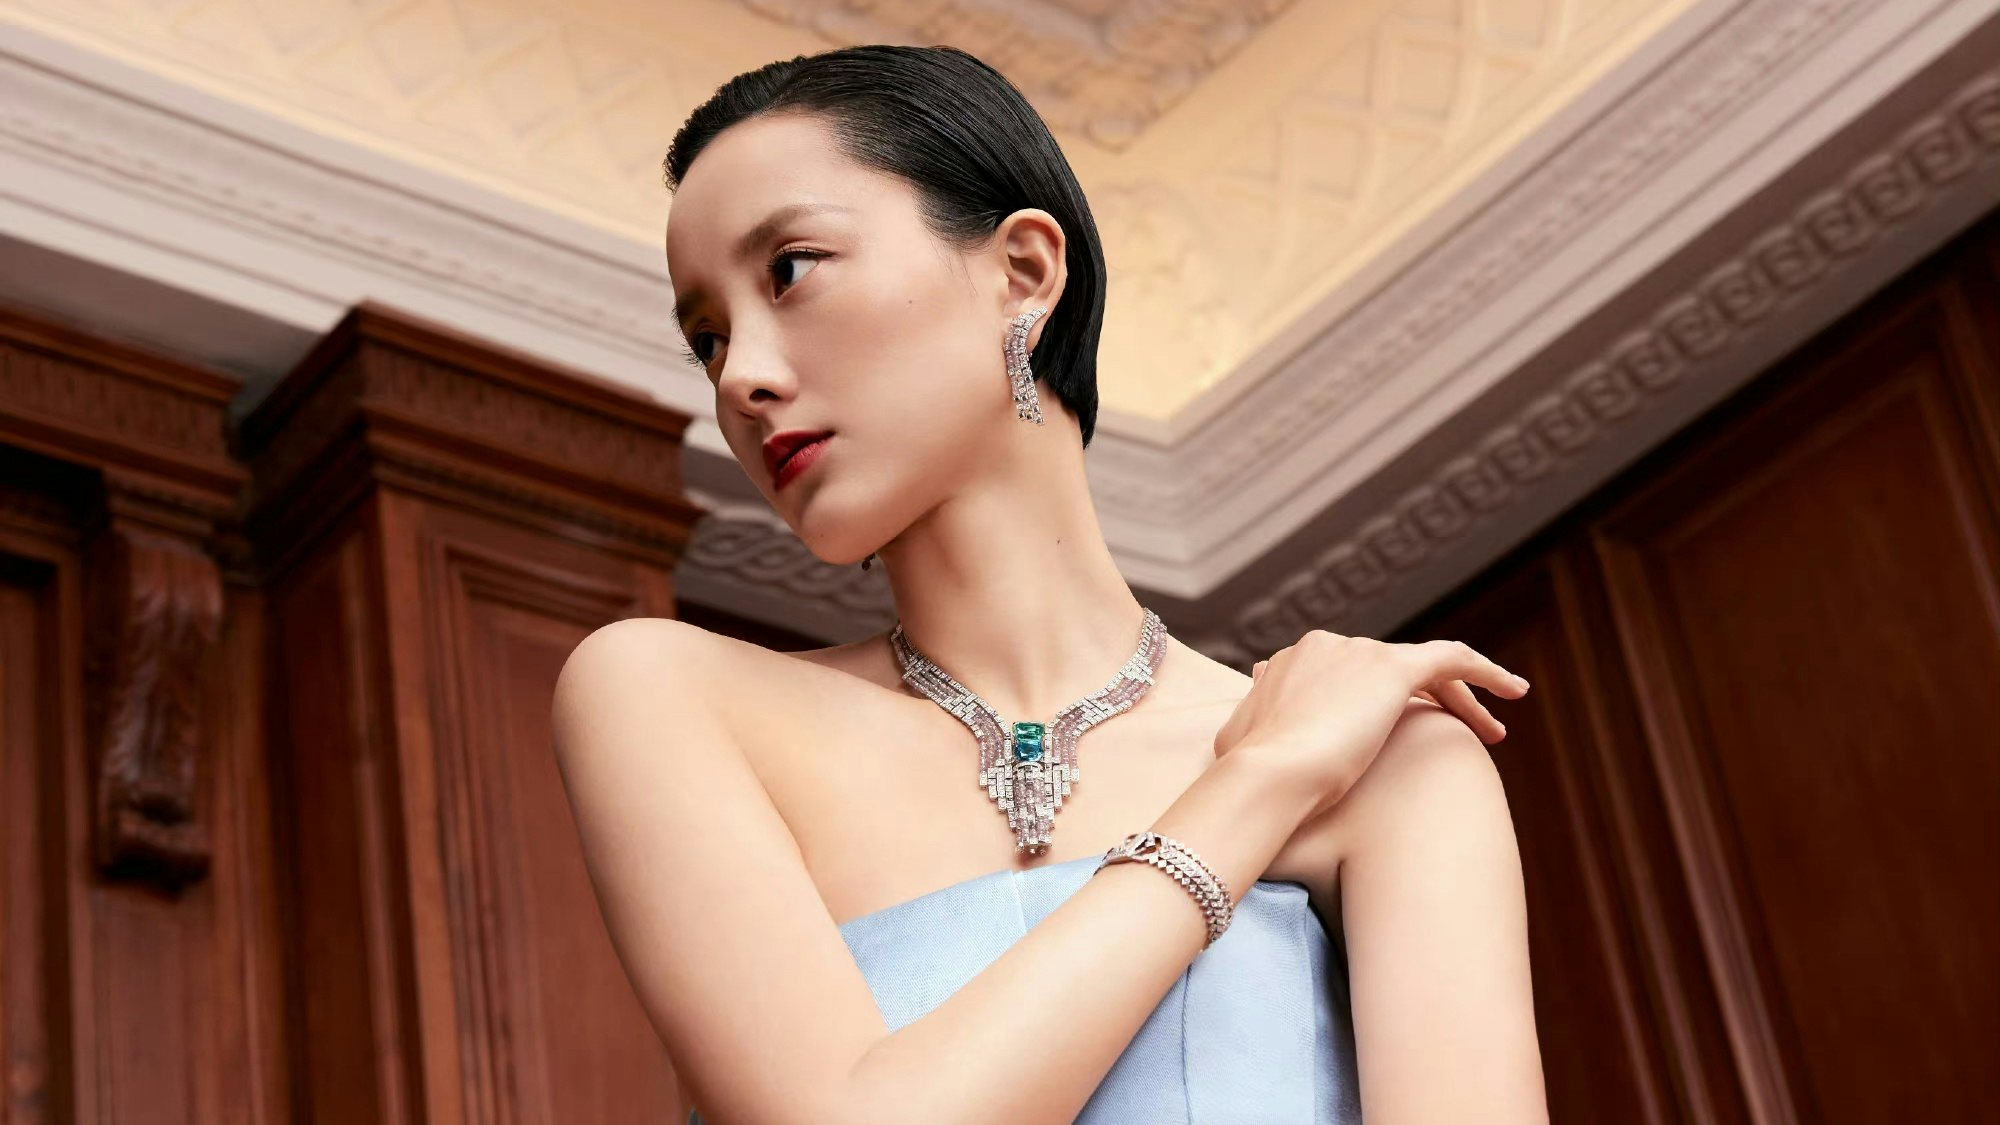 Richemont’s negative projection of the Chinese market dampened investor confidence, lowering its shares by 13 percent. Should luxury be concerned? Photo: Cartier